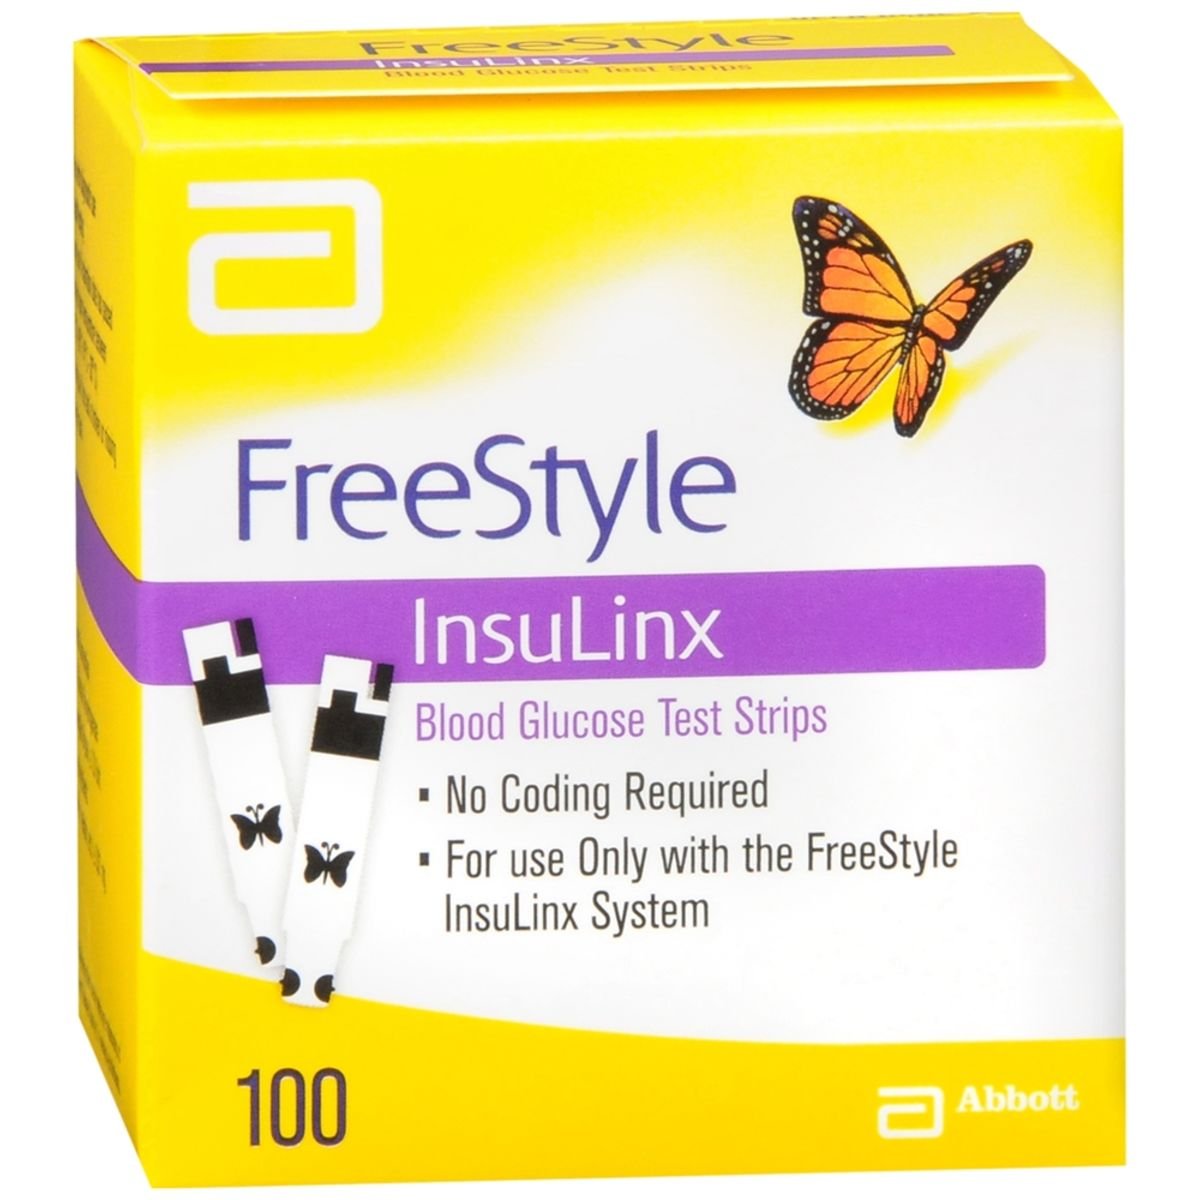 Freestyle Insulinx Blood Glucose Test Strips 100 Ea Medcare